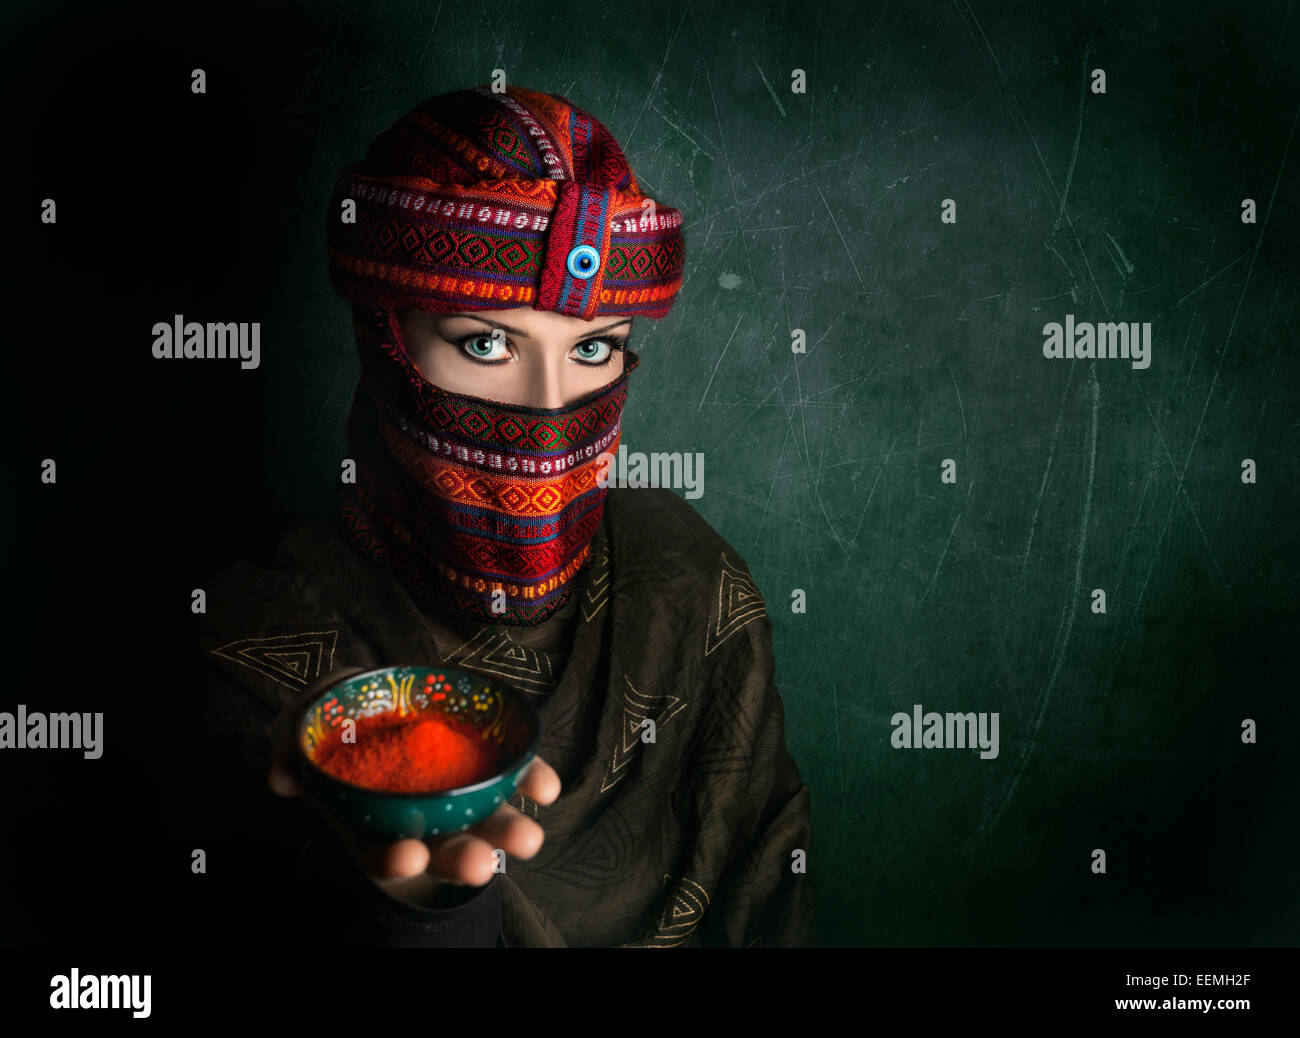 Oriental woman in turban offering red chili powder at green textured wall Stock Photo